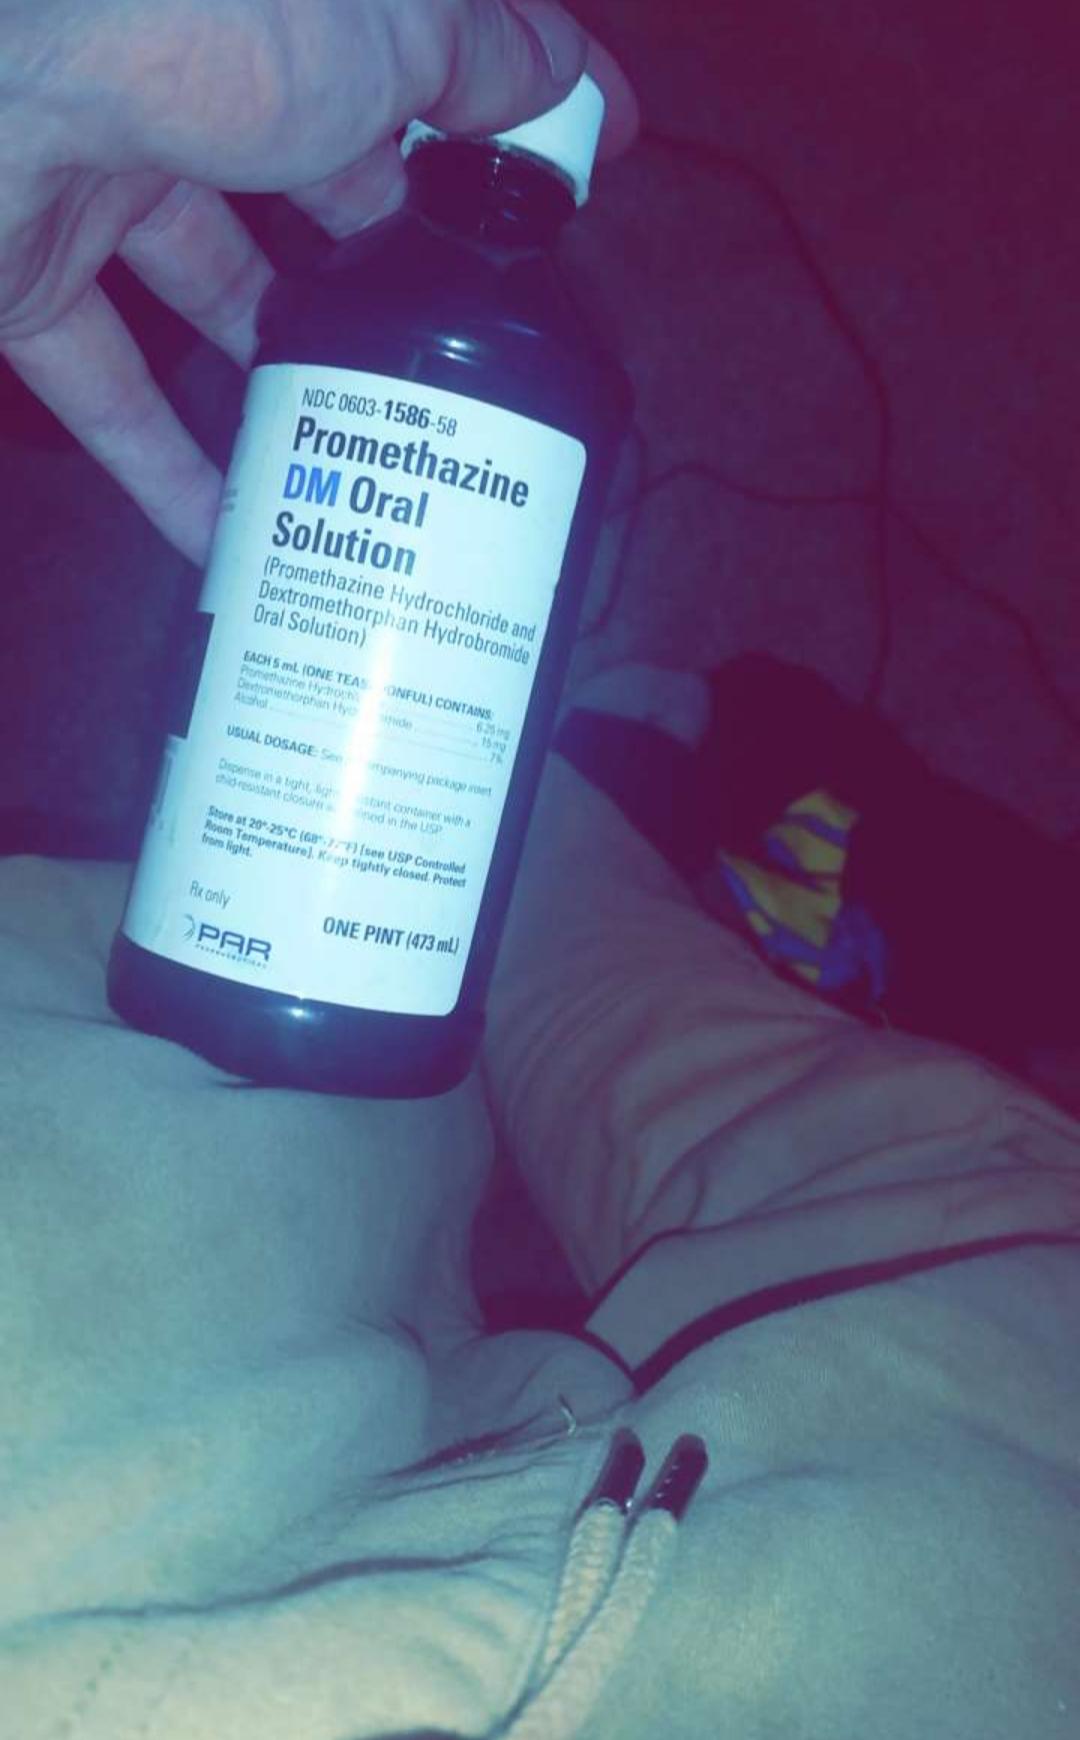 Candy C. reccomend Getting fucked up from promethazine